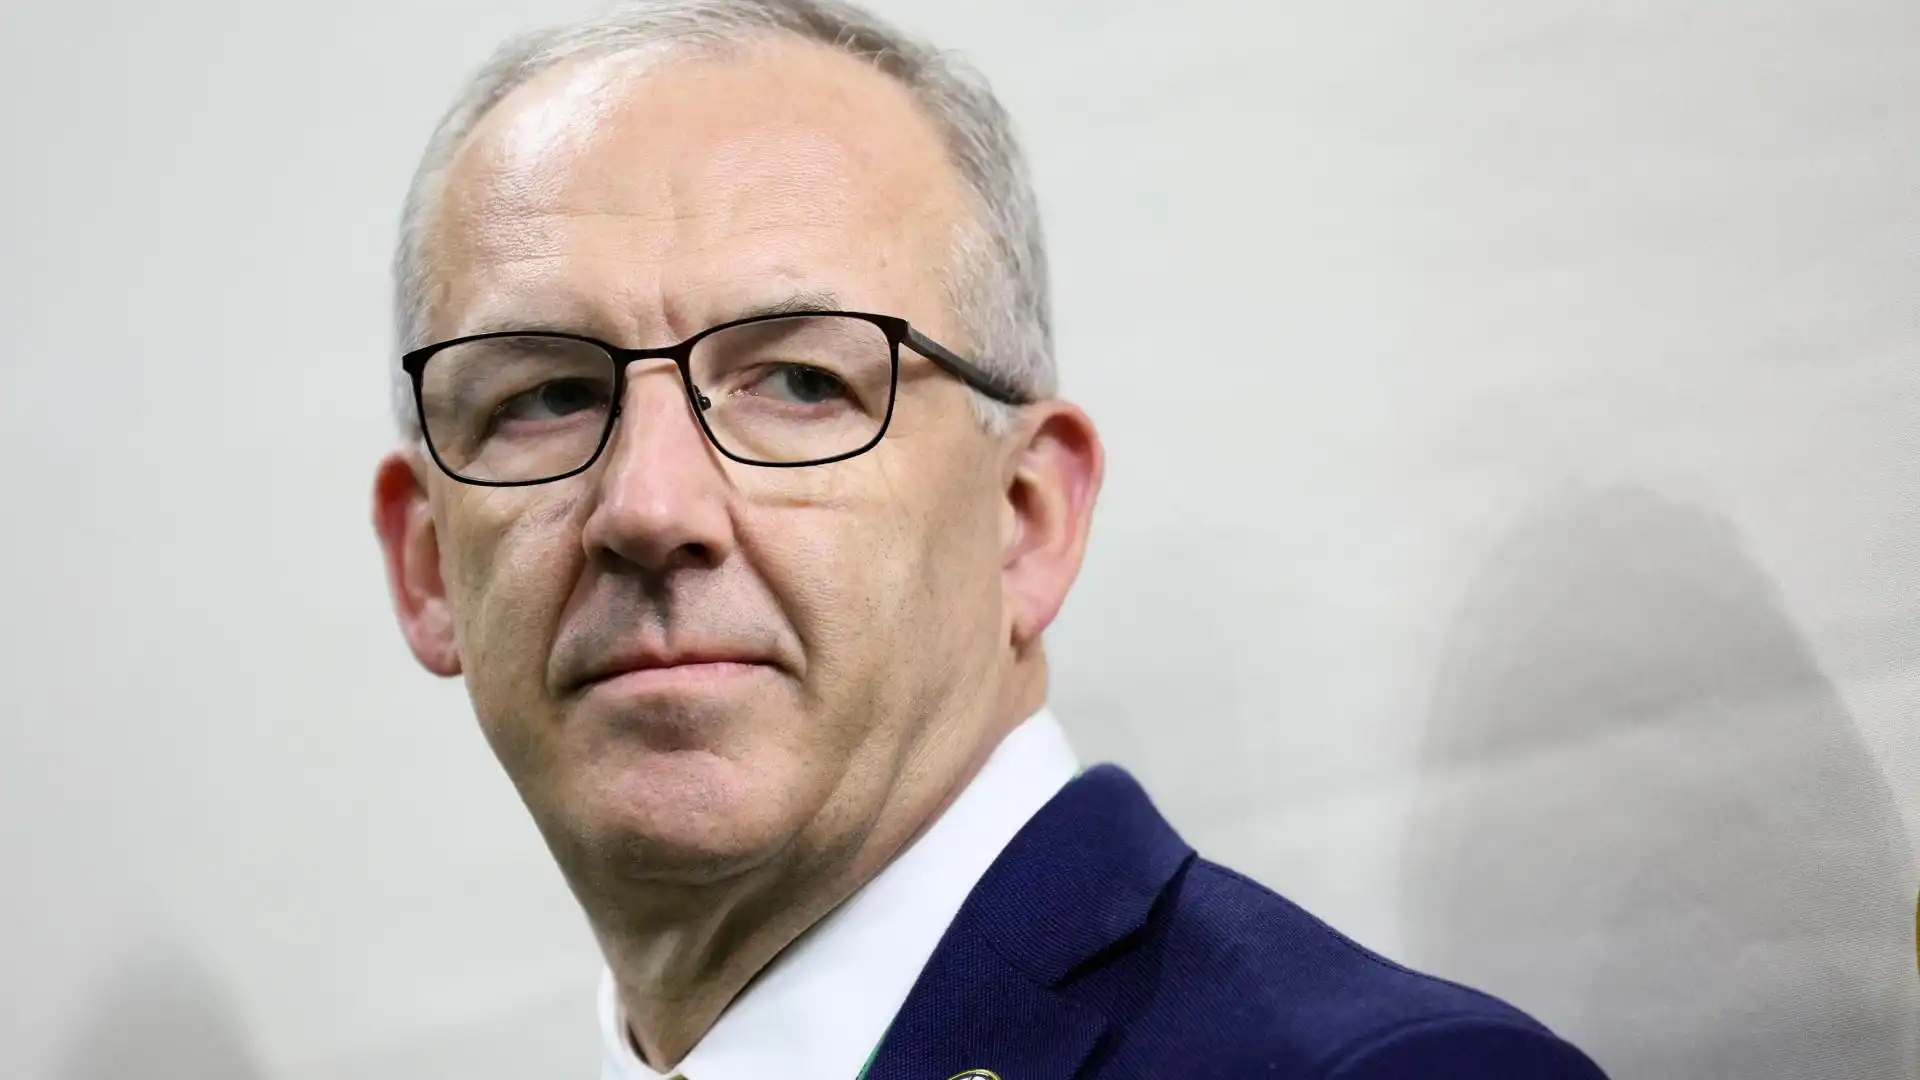 Greg Sankey compares SEC to Sesame Street while politicking for College Football Playoff